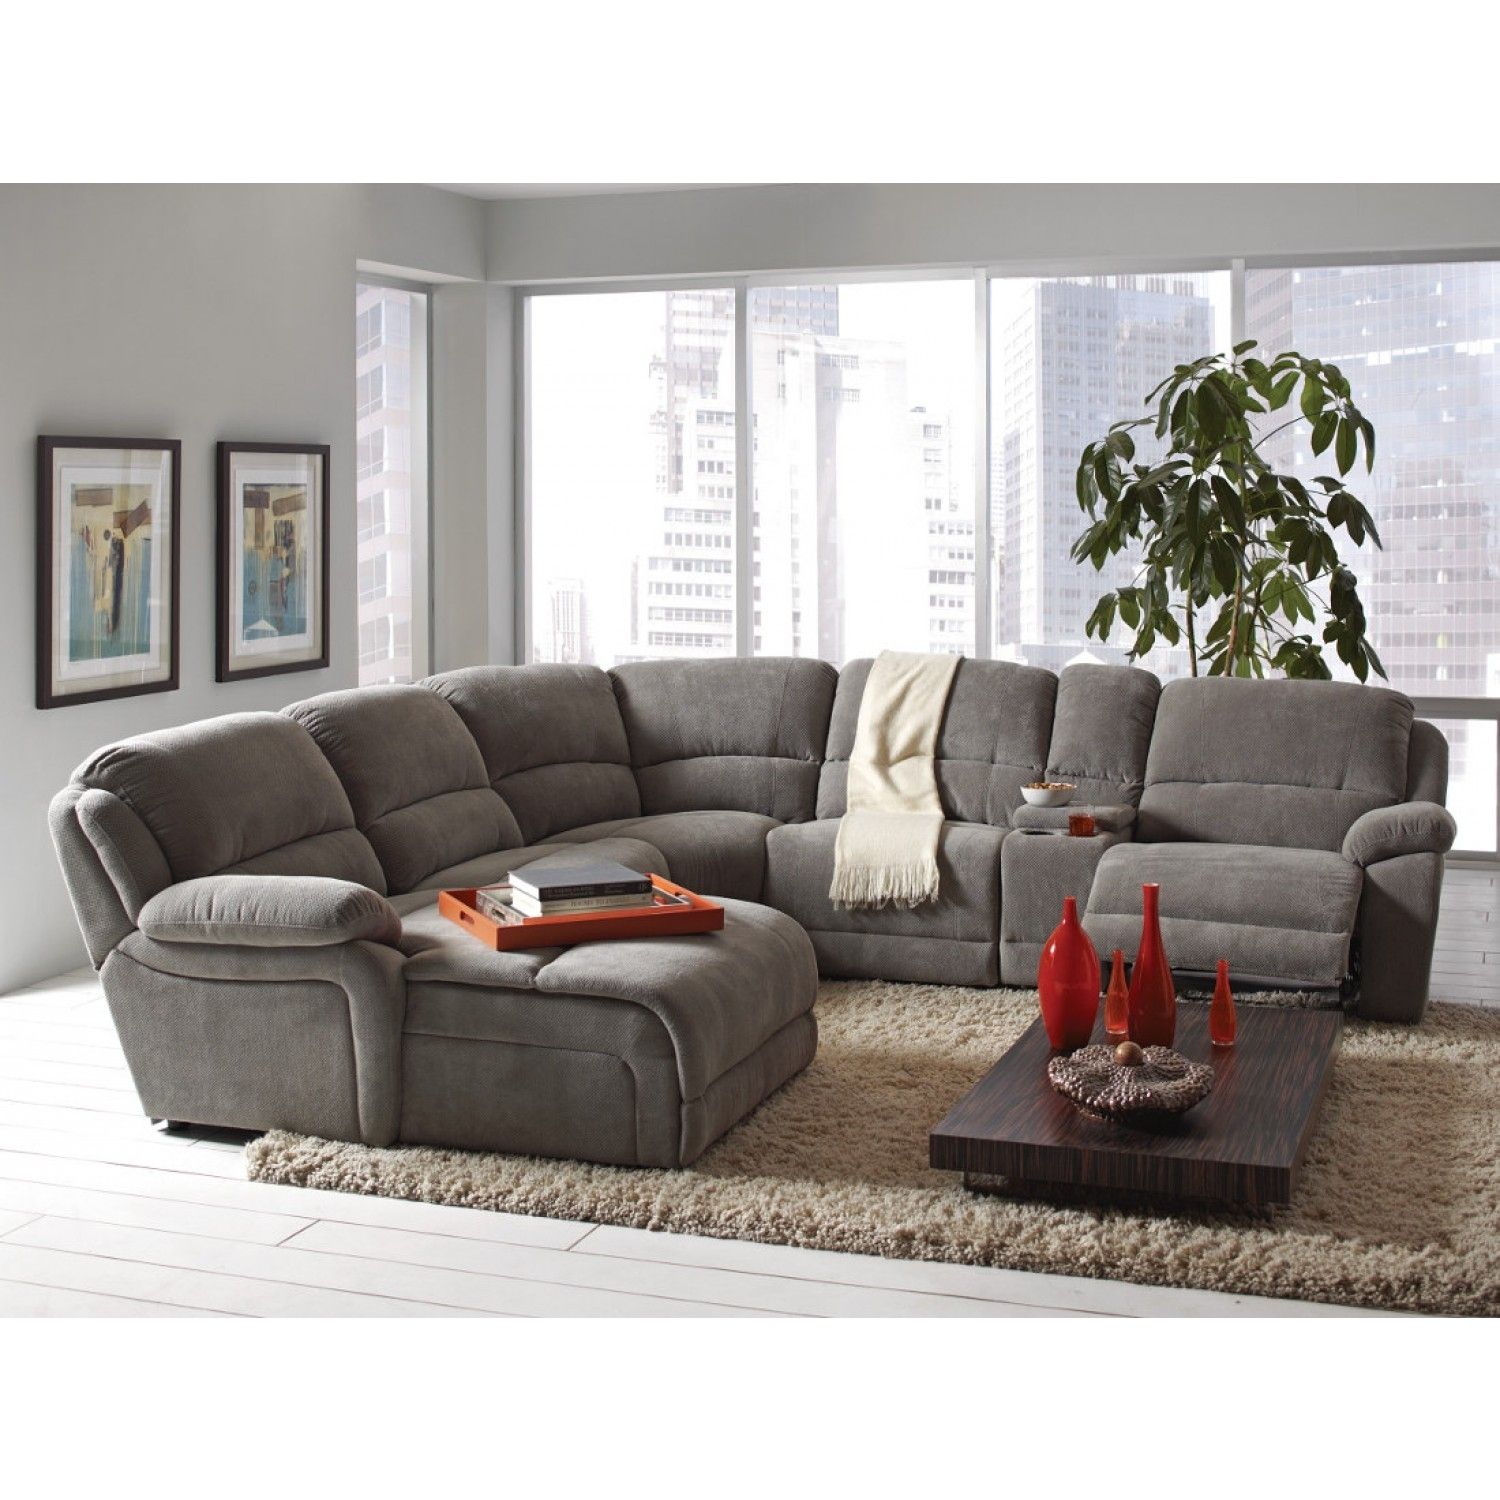 Coaster Mackenzie Silver 6 Piece Reclining Sectional Sofa With In Sectional Sofas At Austin (View 6 of 10)